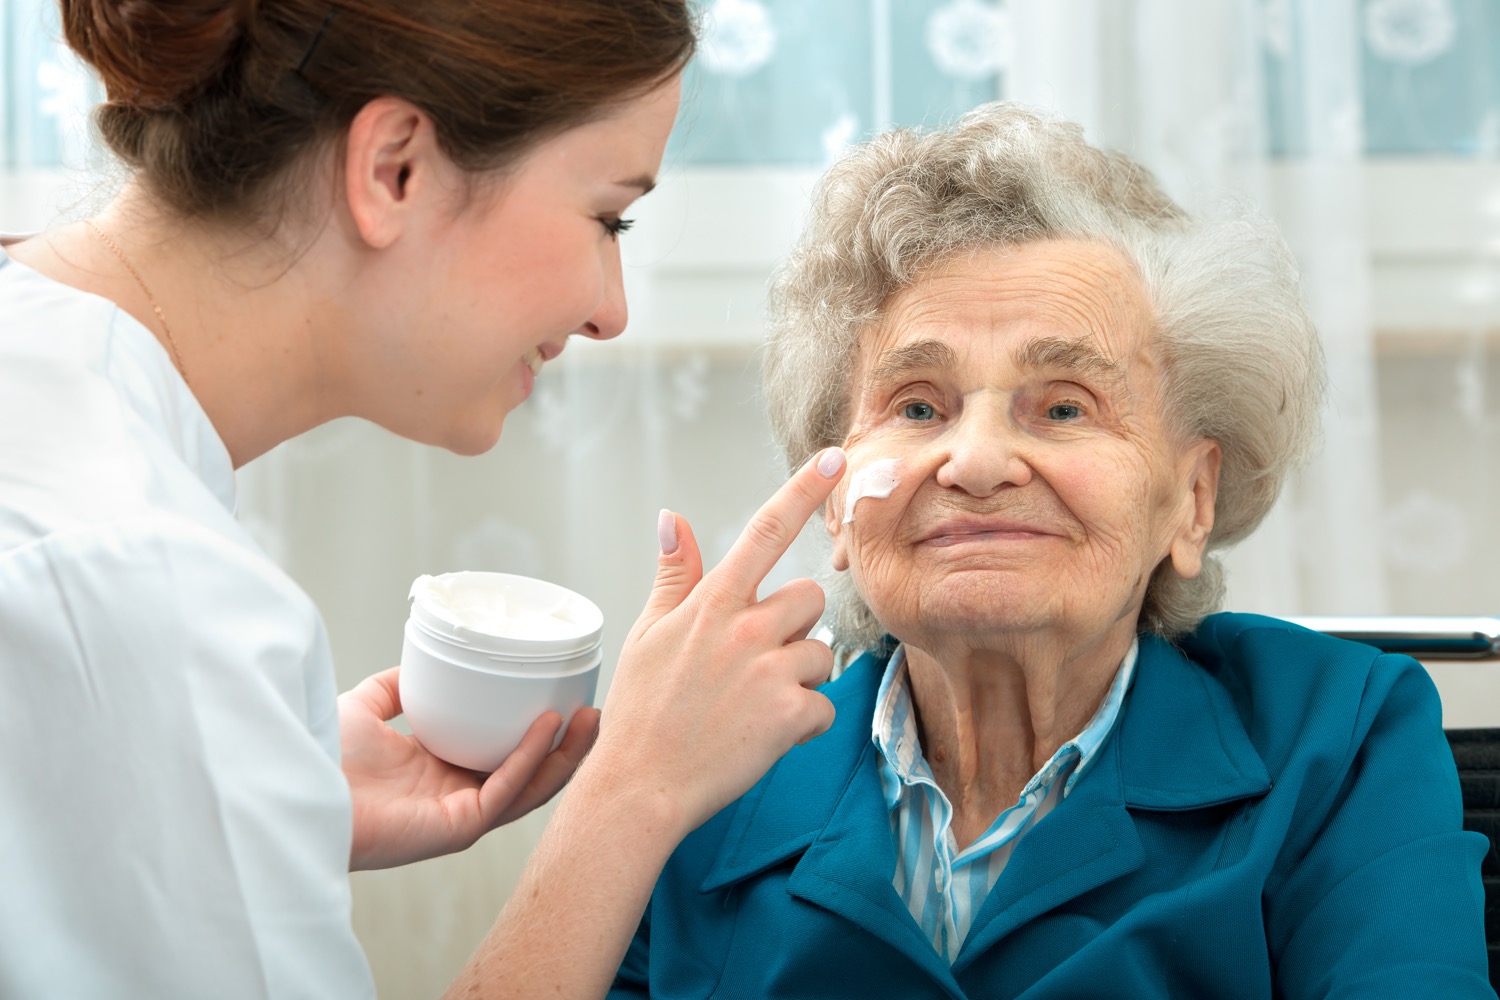 Caregiver applies facial cream to her client as part of the senior's personal care routine.